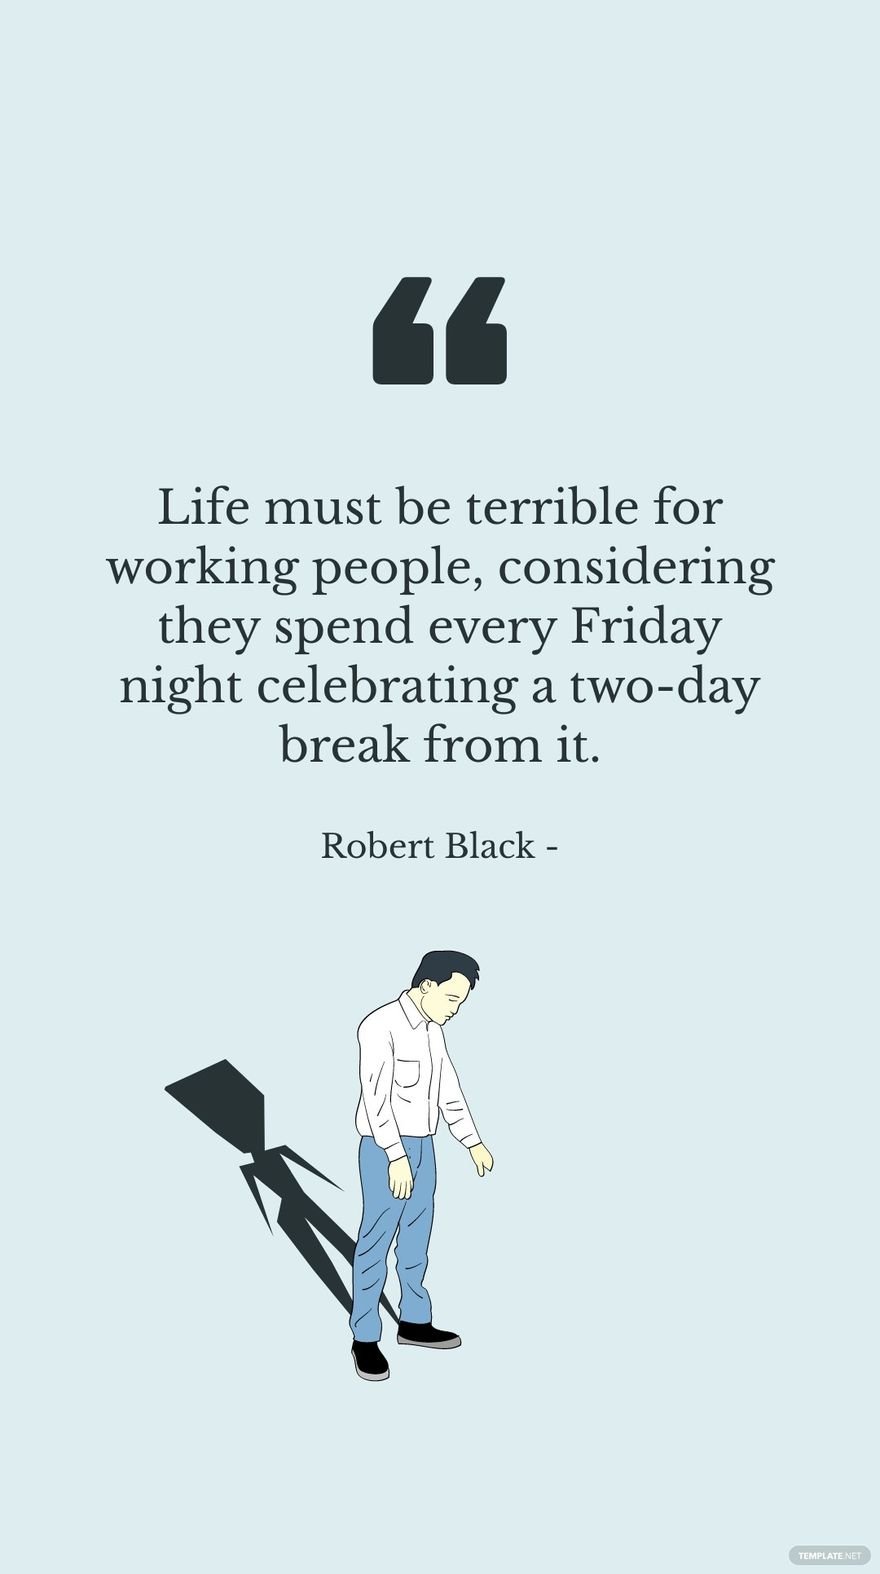 Robert Black - Life must be terrible for working people, considering they spend every Friday night celebrating a two-day break from it. in JPG